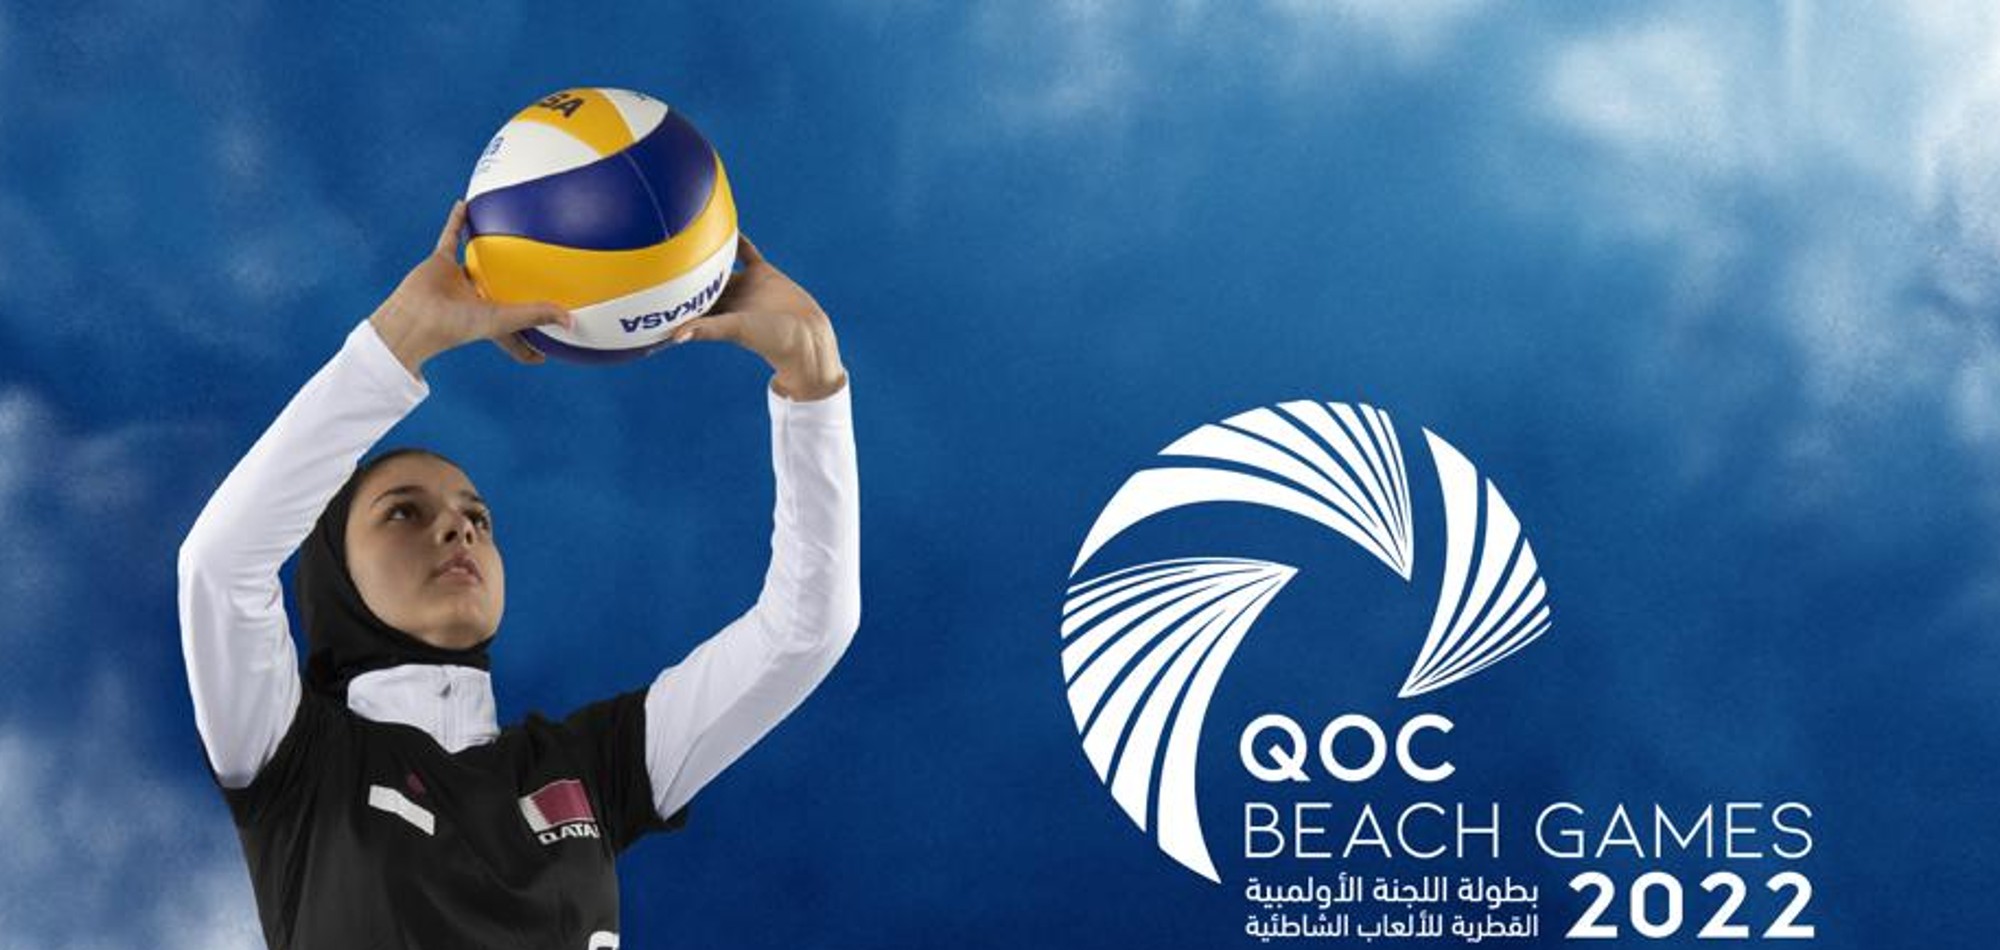 Second Edition of QOC Beach Games 2022 to Kick Off March 19